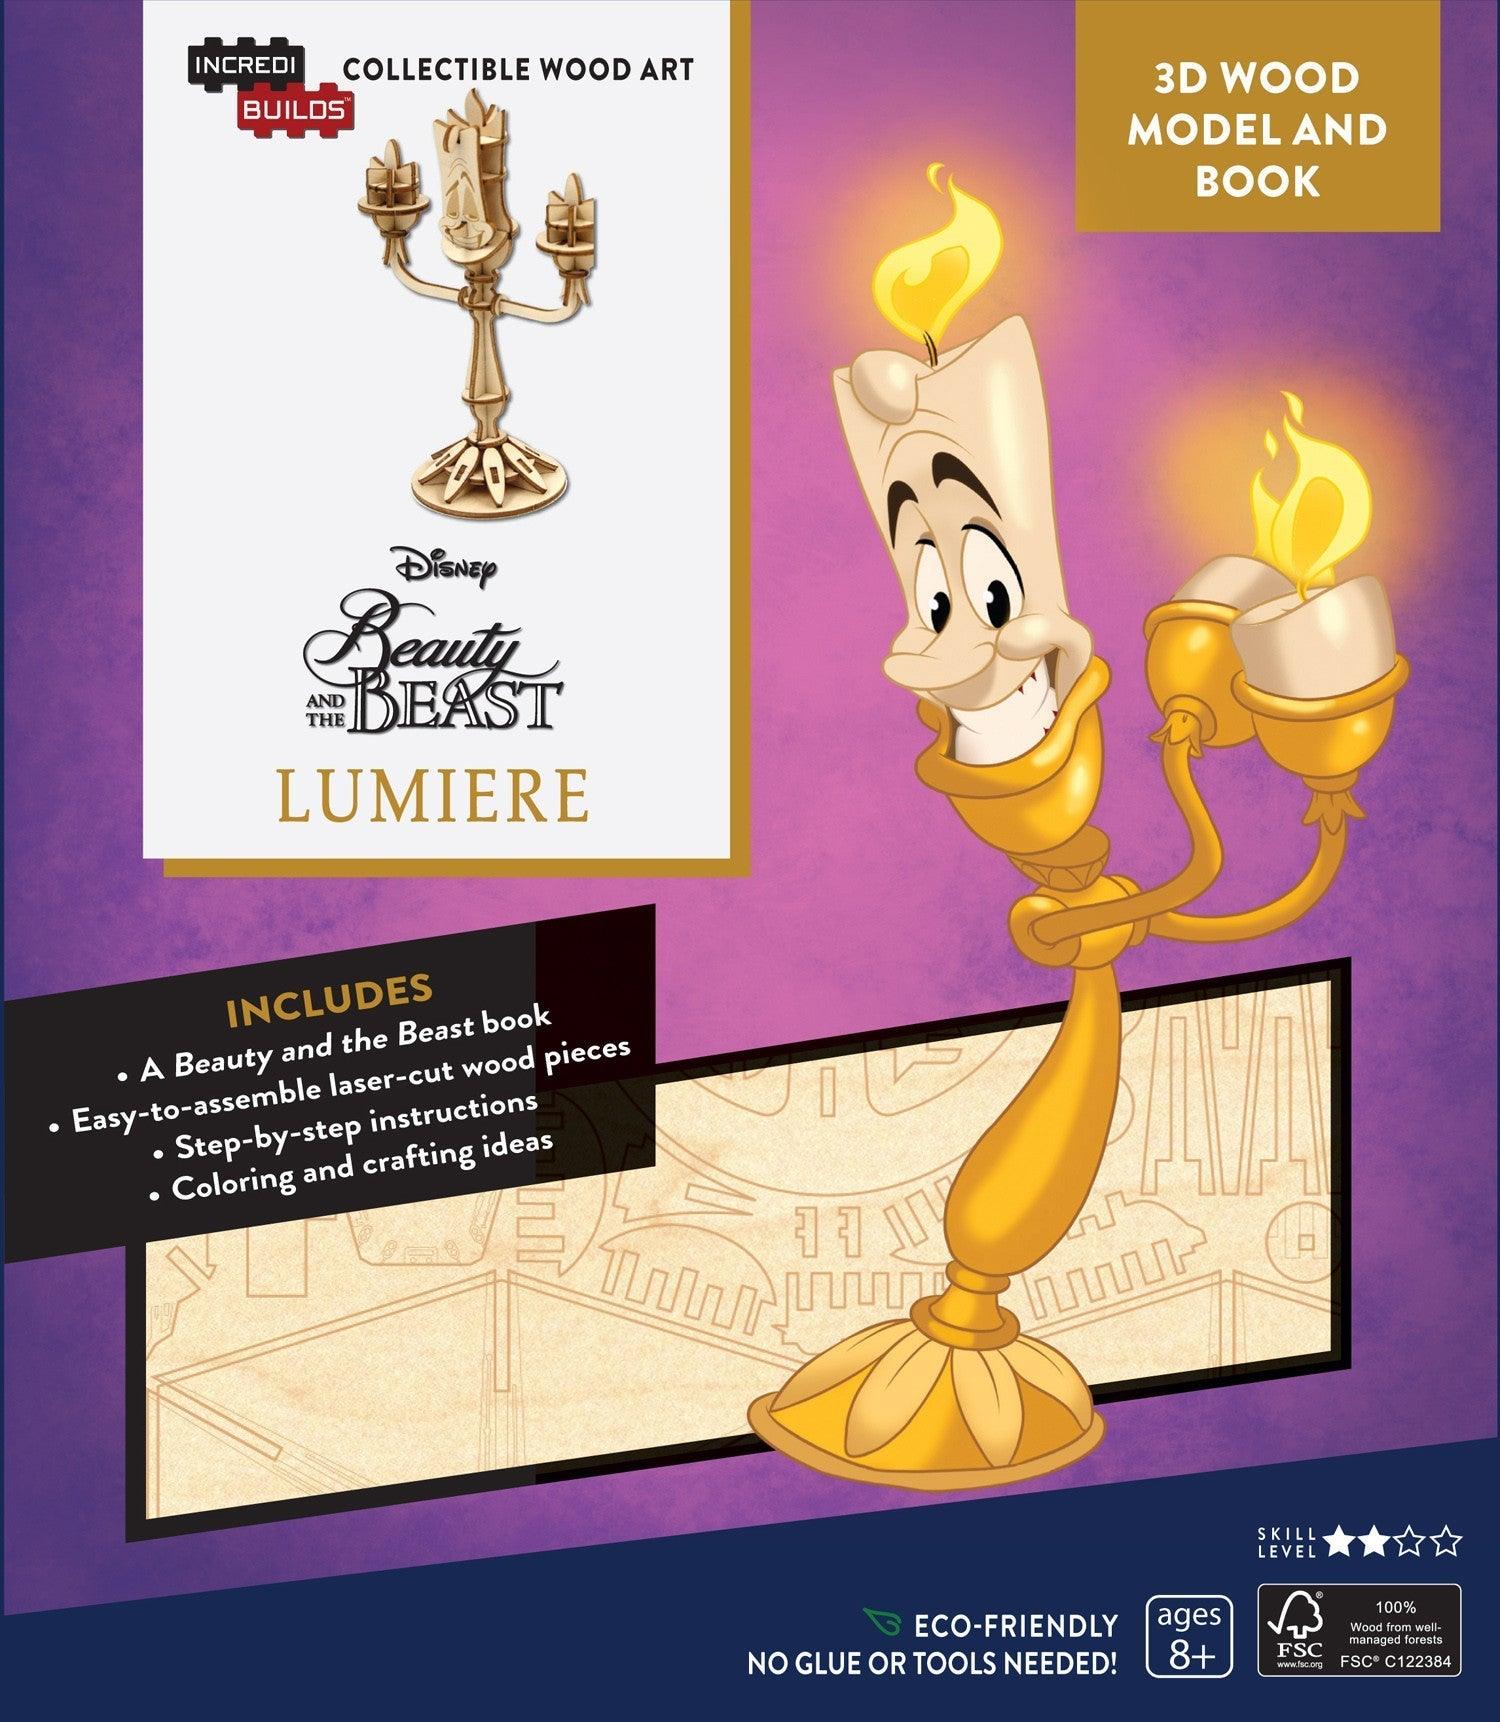 VR-49755 Incredibuilds Disney Beauty and the Beast Lumiere 3D Wood Model and Book - Insight Editions - Titan Pop Culture